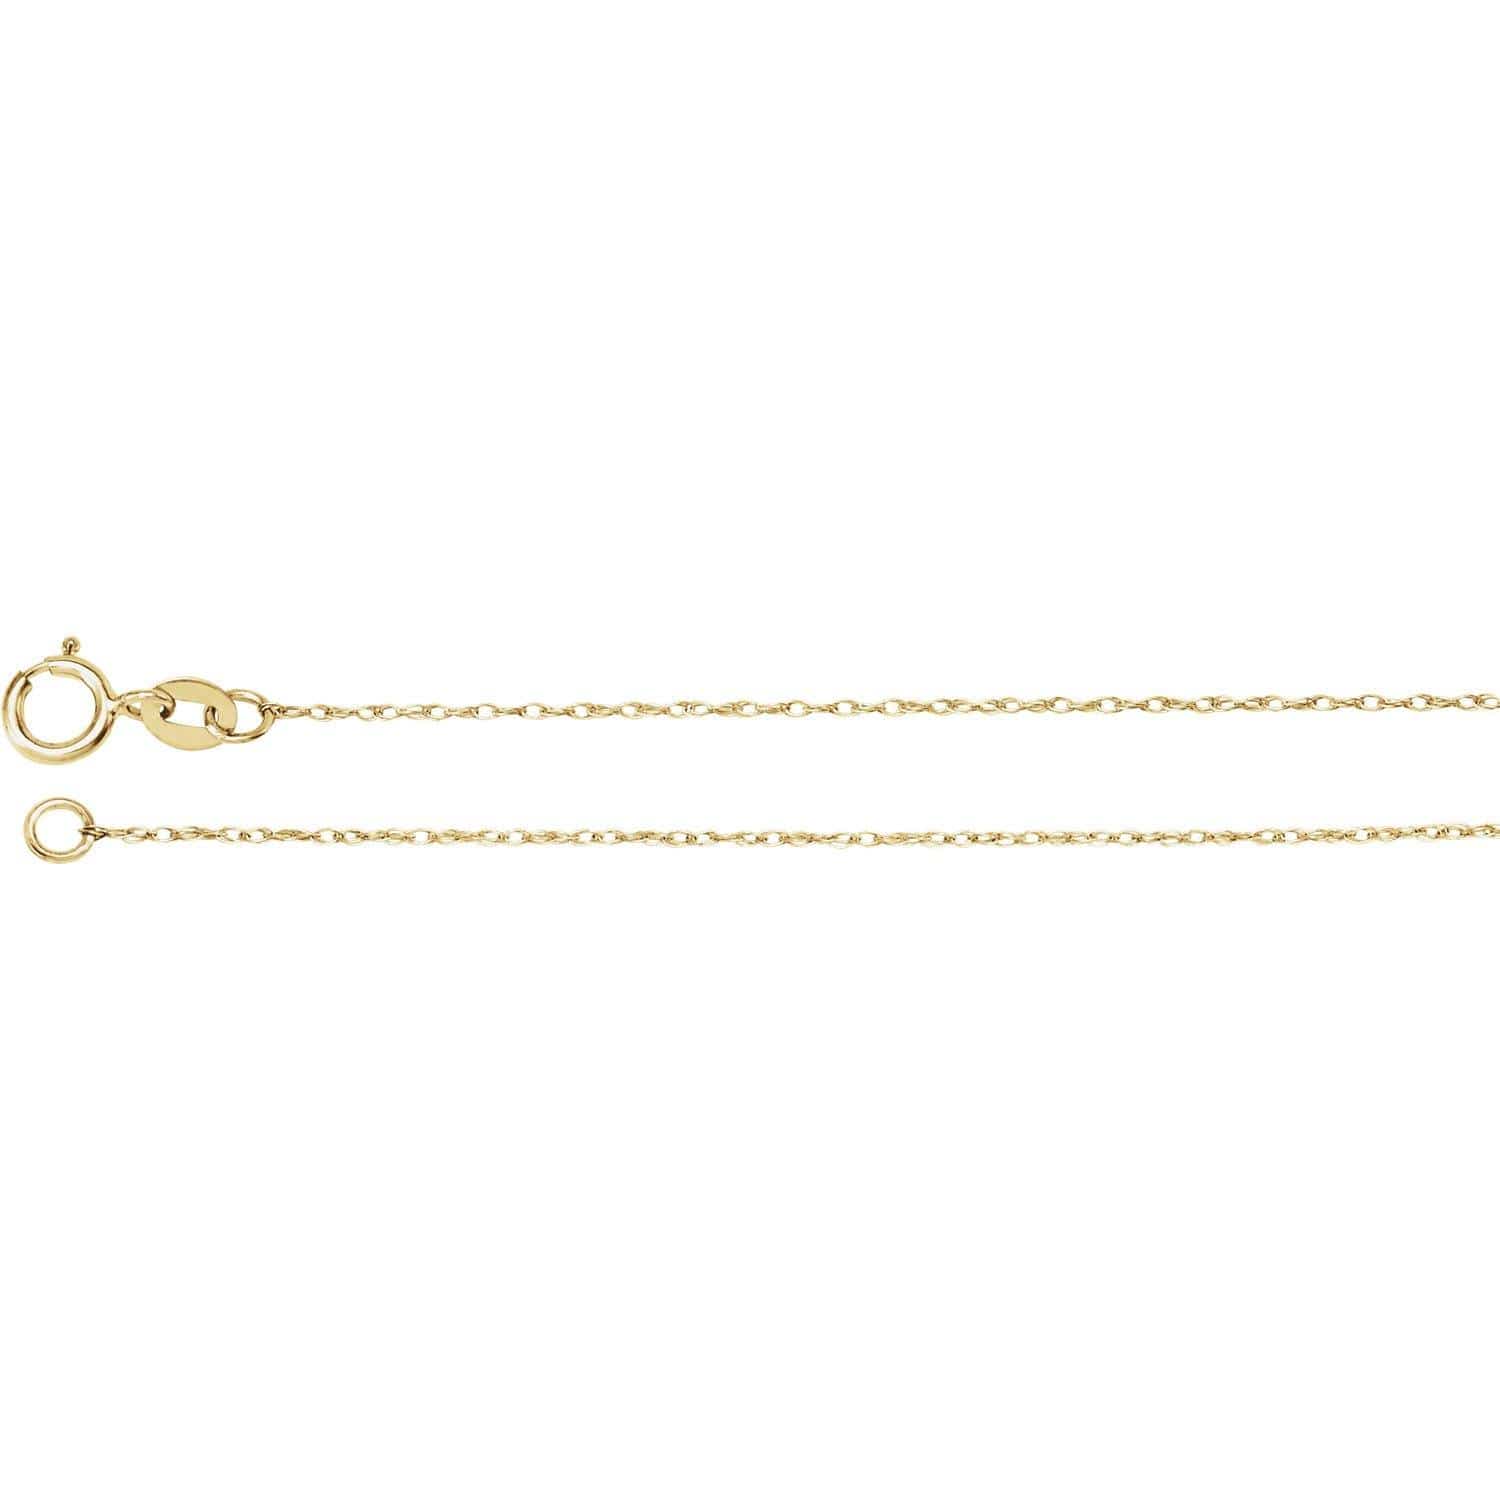 14k Solid Gold 0.75mm Delicate Rope Chain 16" Lenght / 14k Yellow Gold Necklace / Pendant by Nodeform